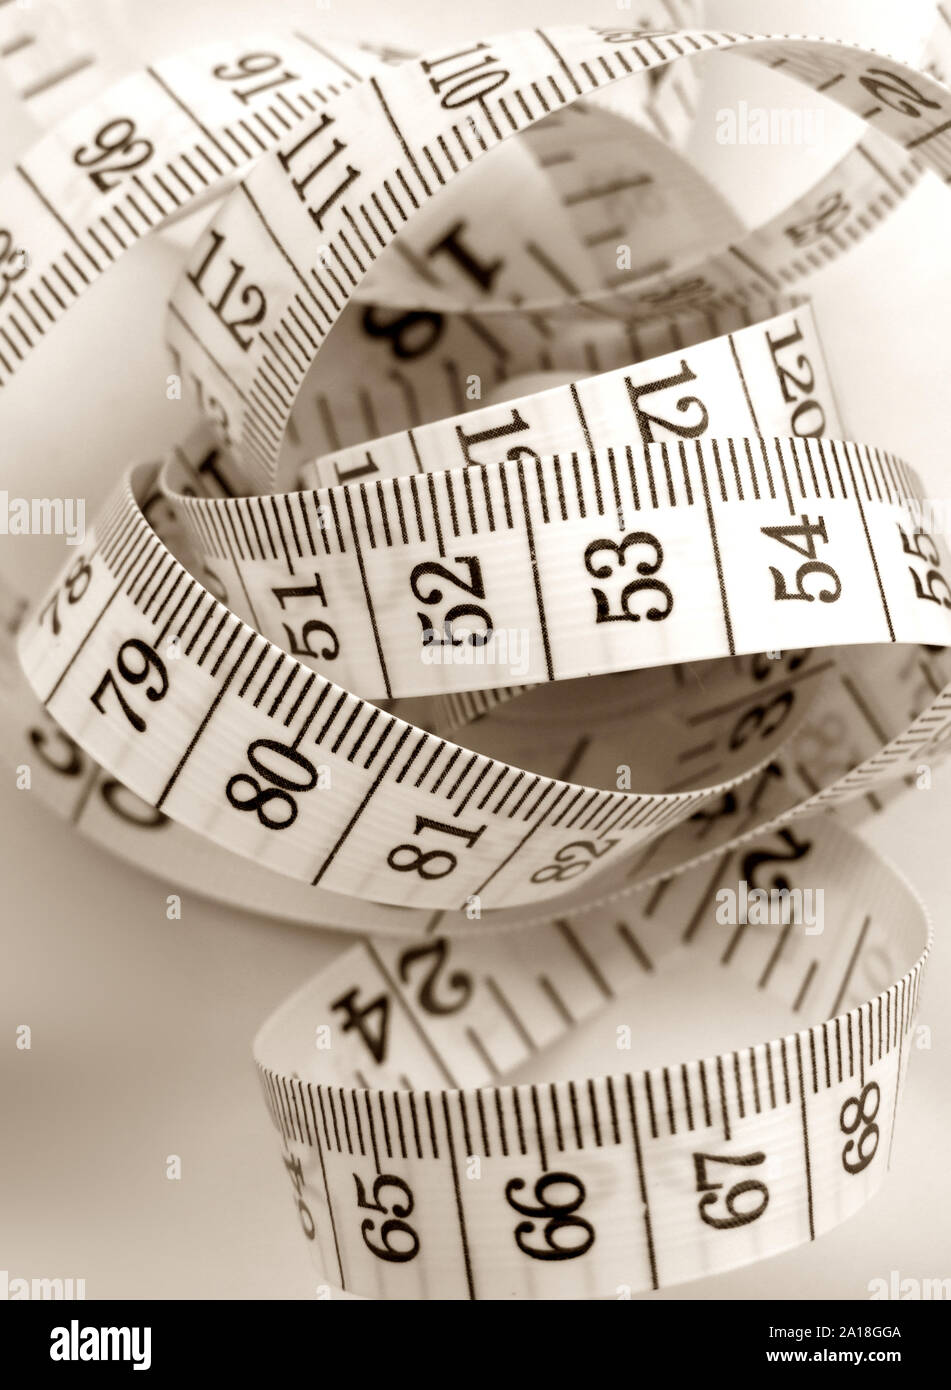 Close-up of a tape measure Stock Photo